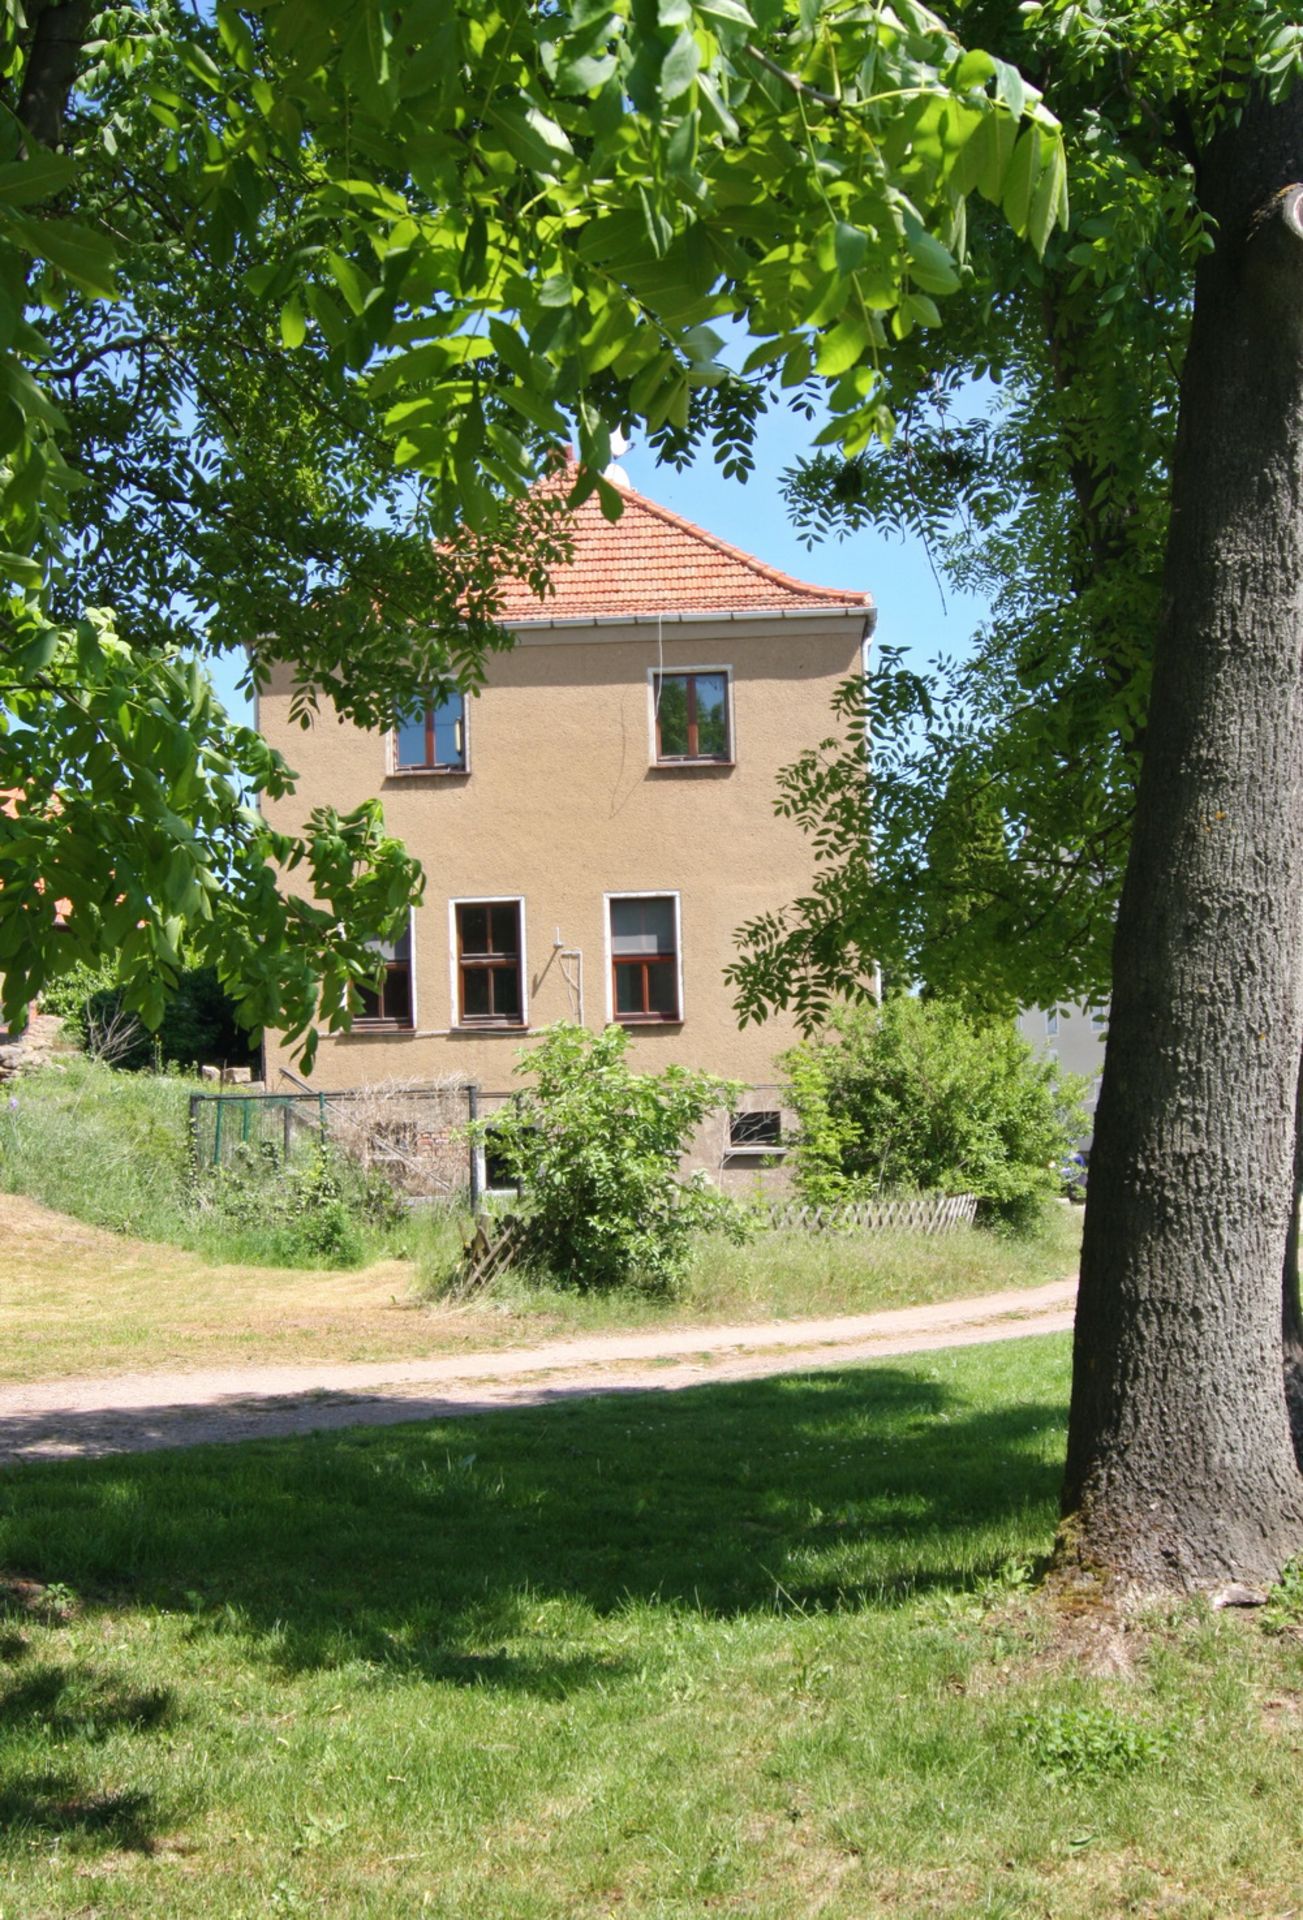 LARGE HOUSING BLOCK IN HORNSOMMEM, GERMANY - READY TO MOVE INTO - Image 15 of 91